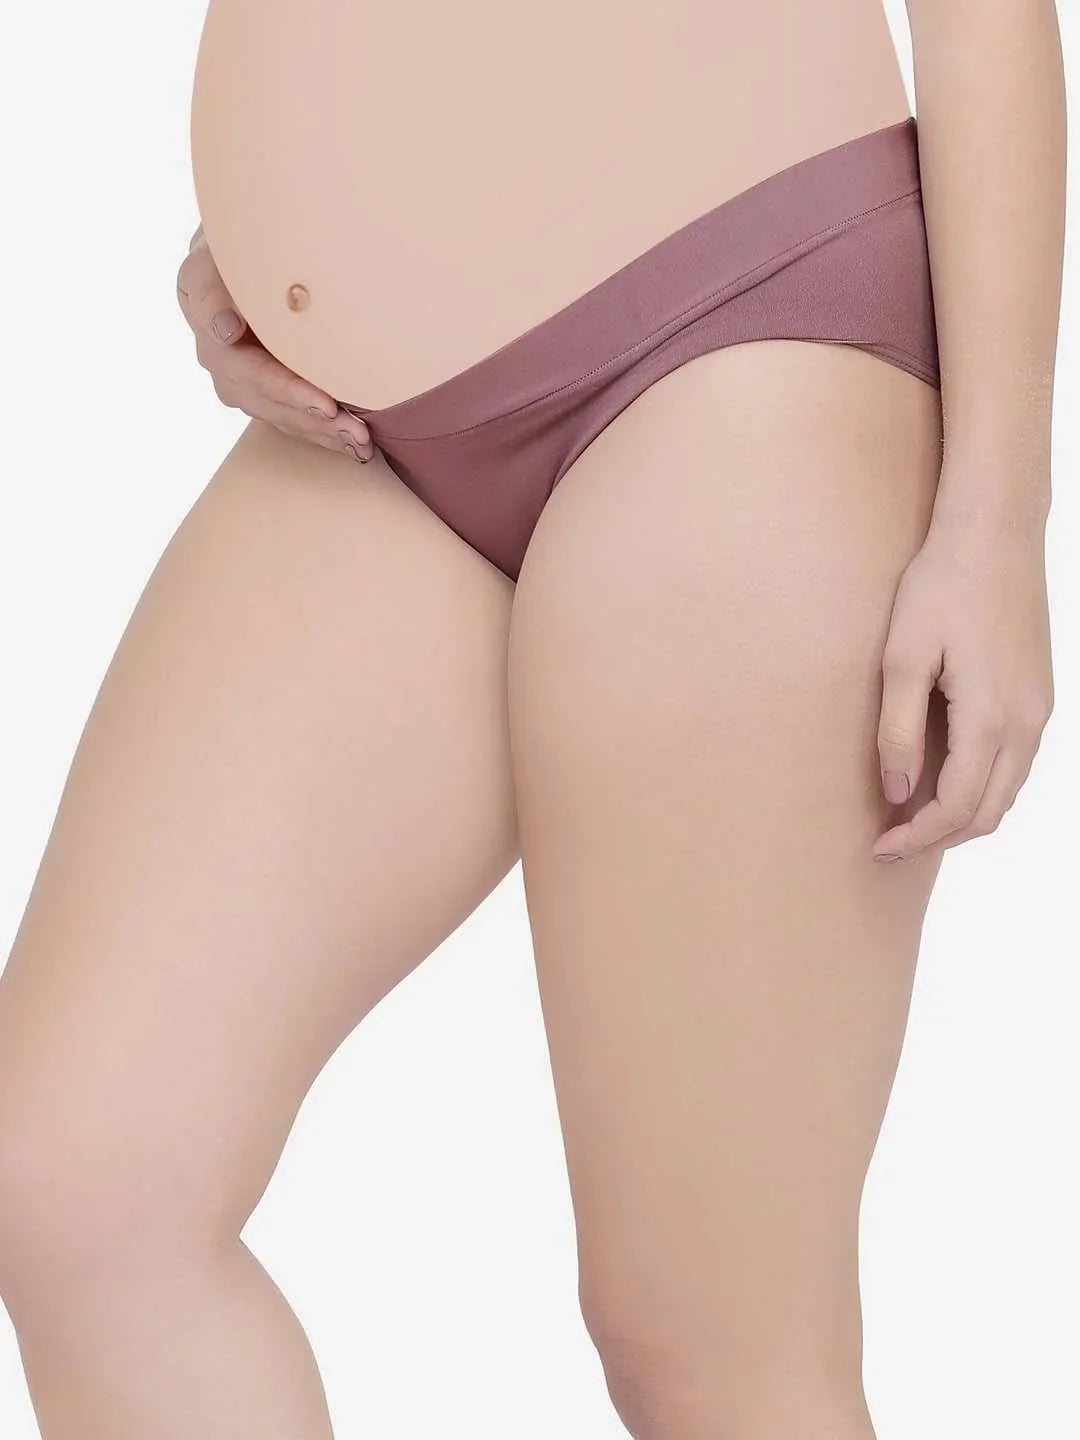 Low Rise Maternity Panty